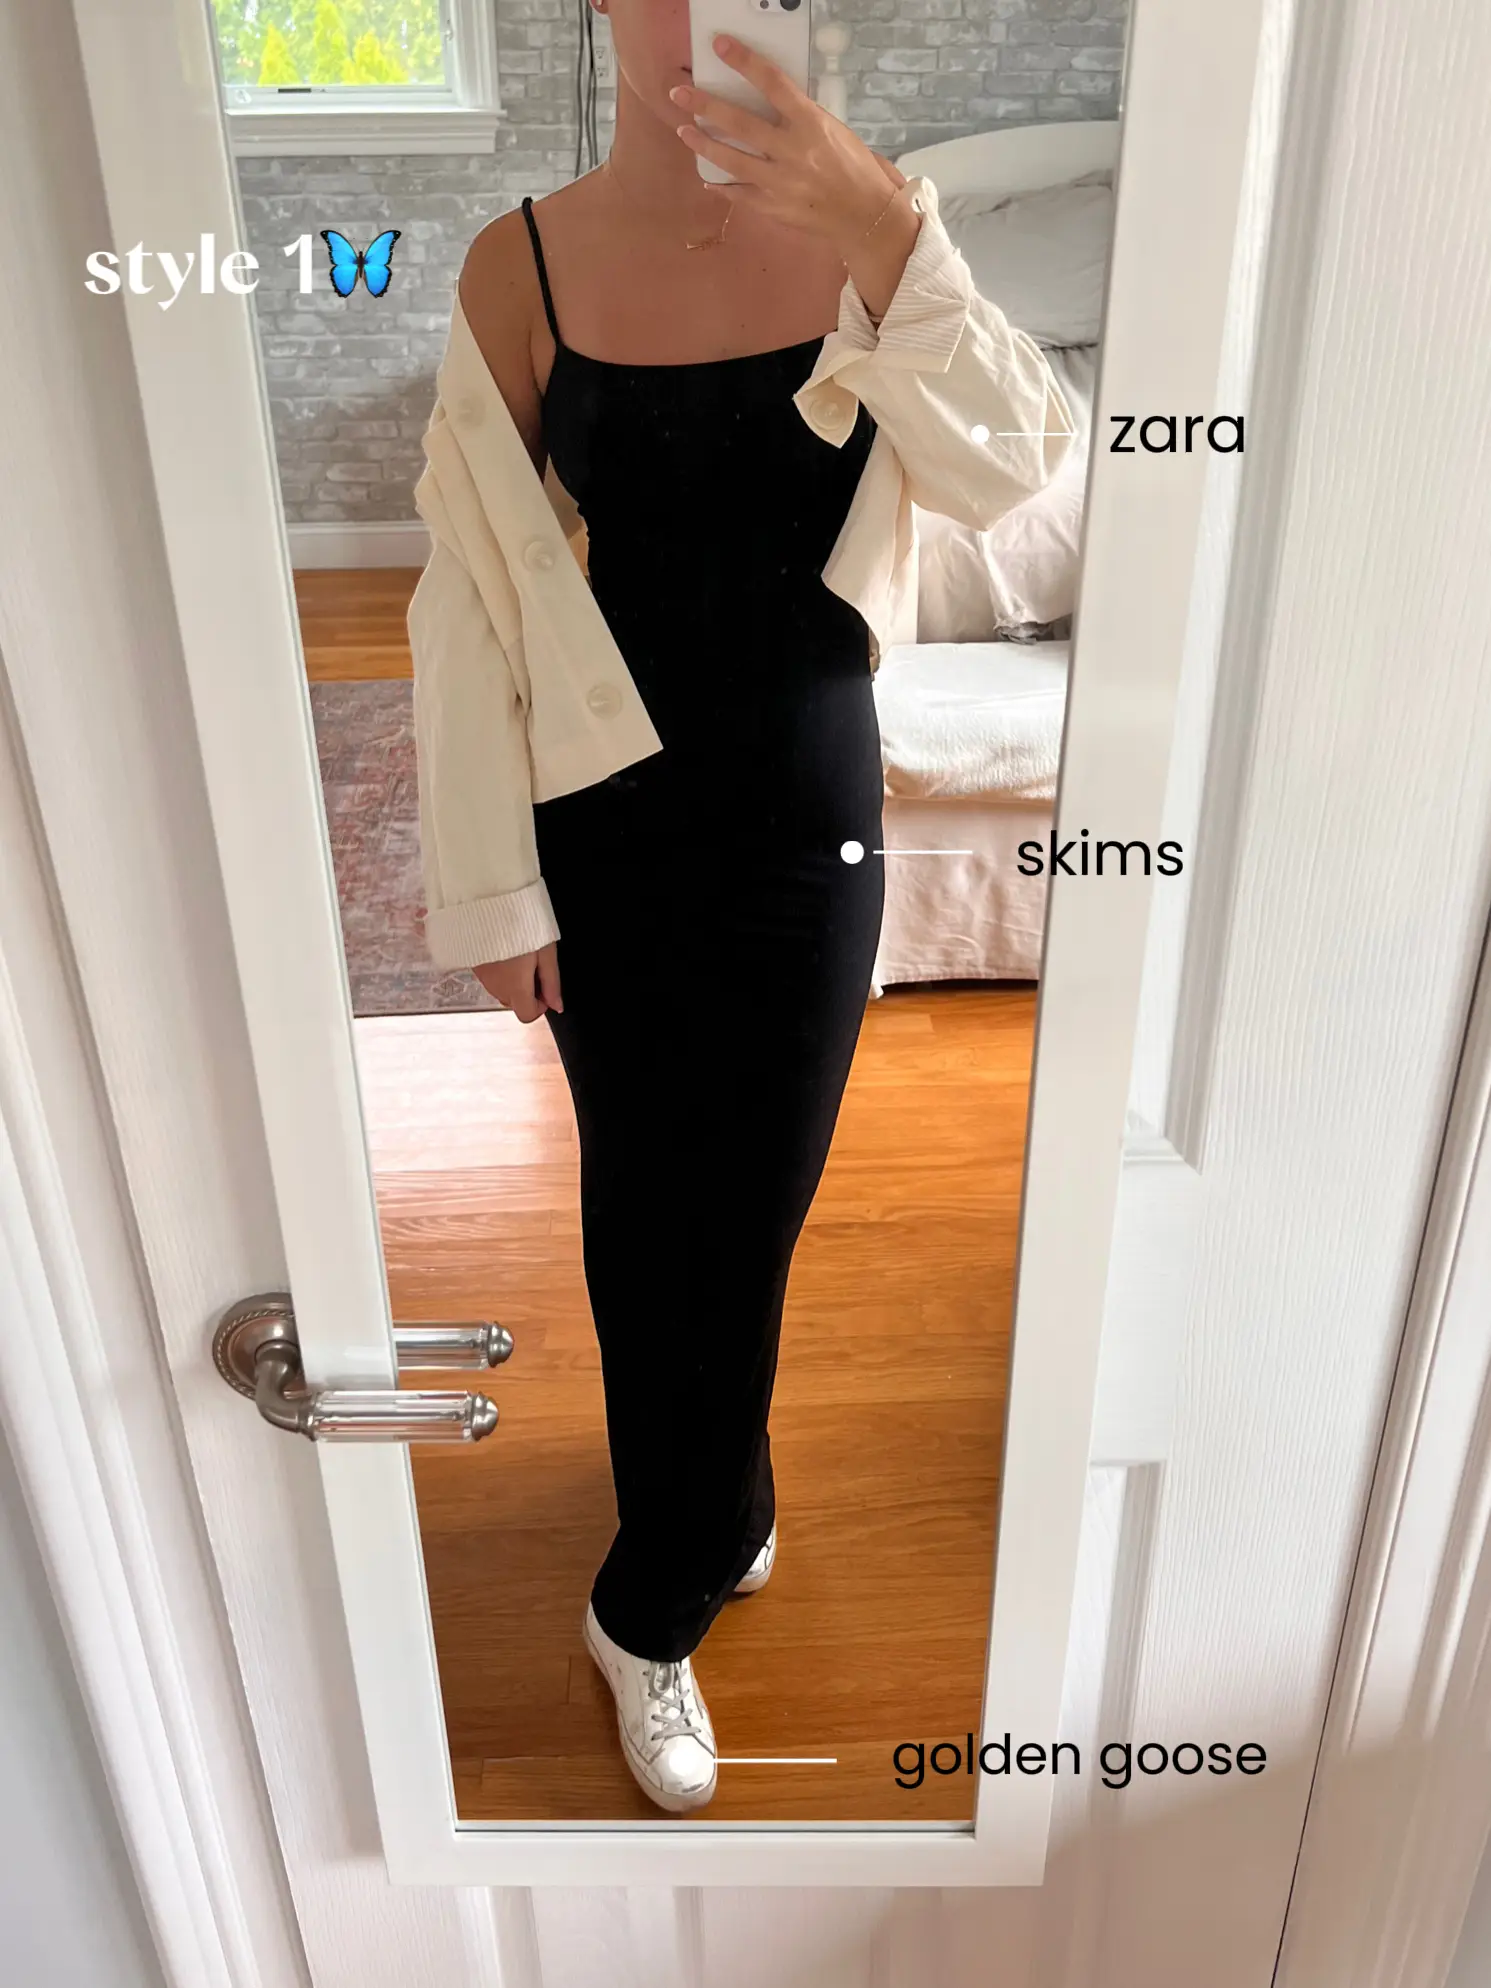 Skims dress outfit idea for a date night #skimsdressoutfit